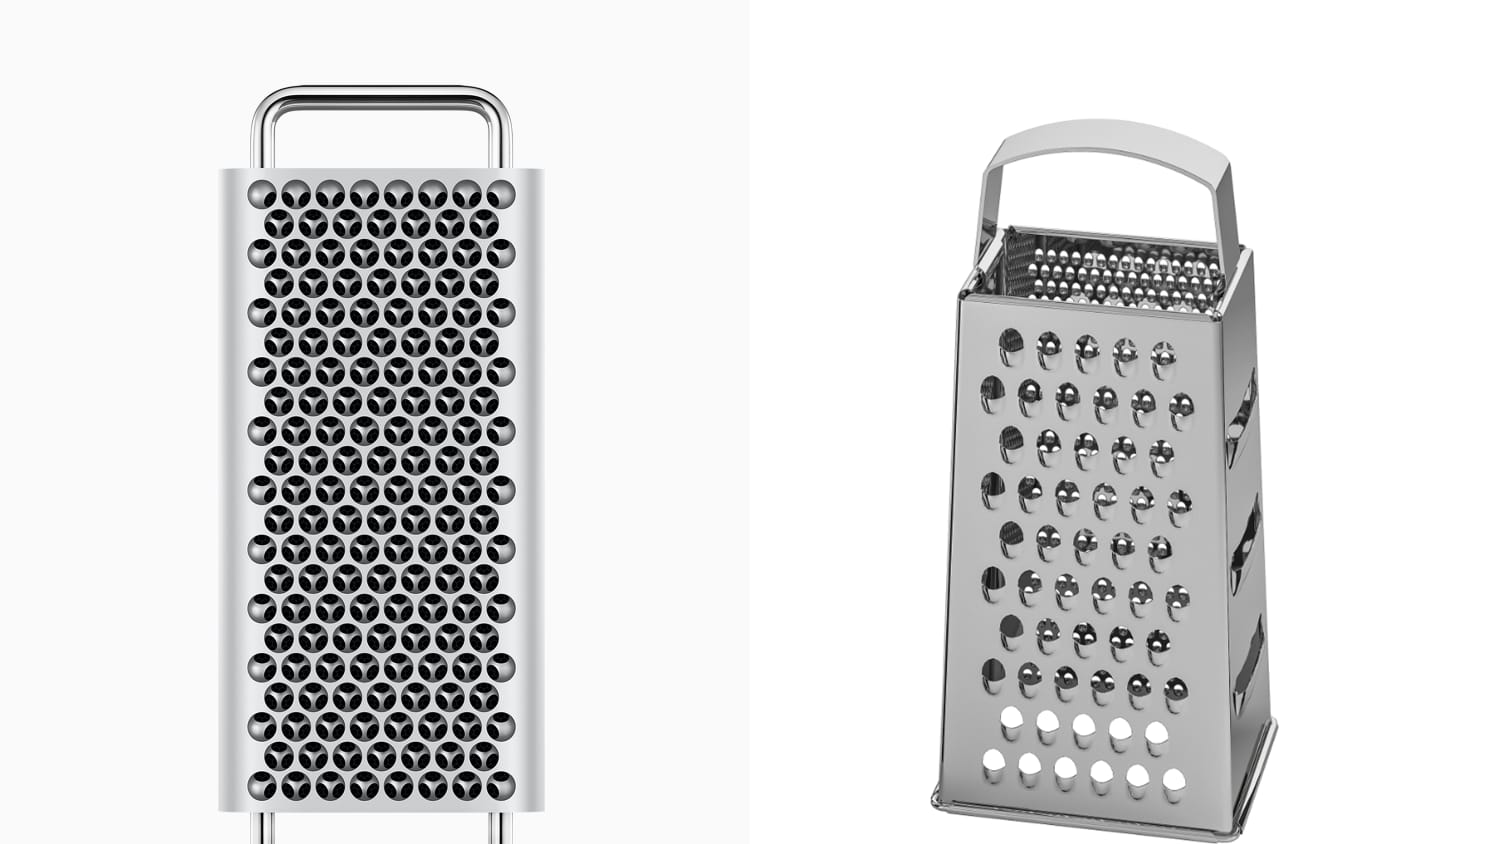 The internet can't believe Apple launched a $5999 cheese grater